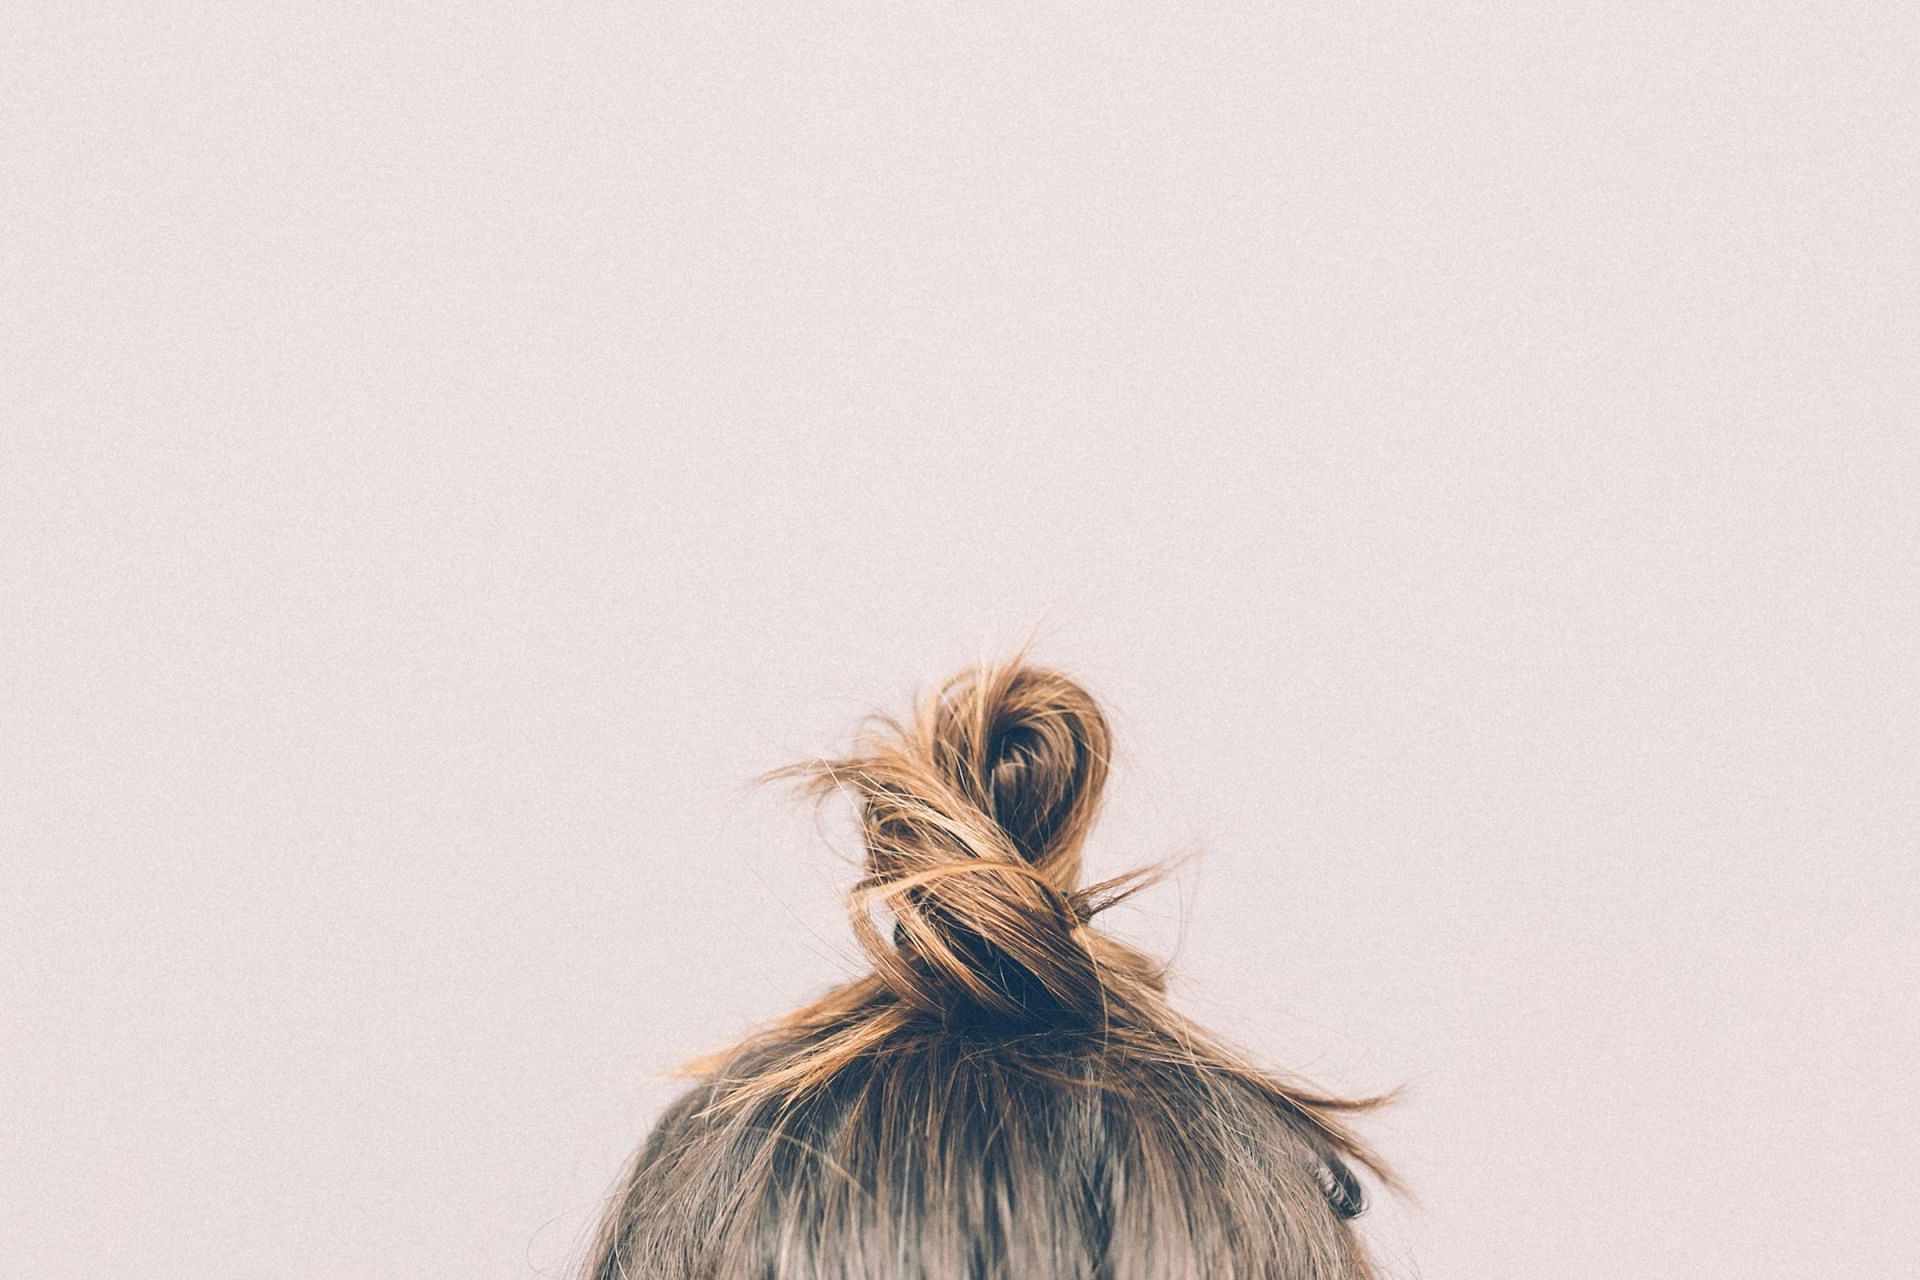 How much hair loss is normal? (Photo by Kasia Serbin on Unsplash)